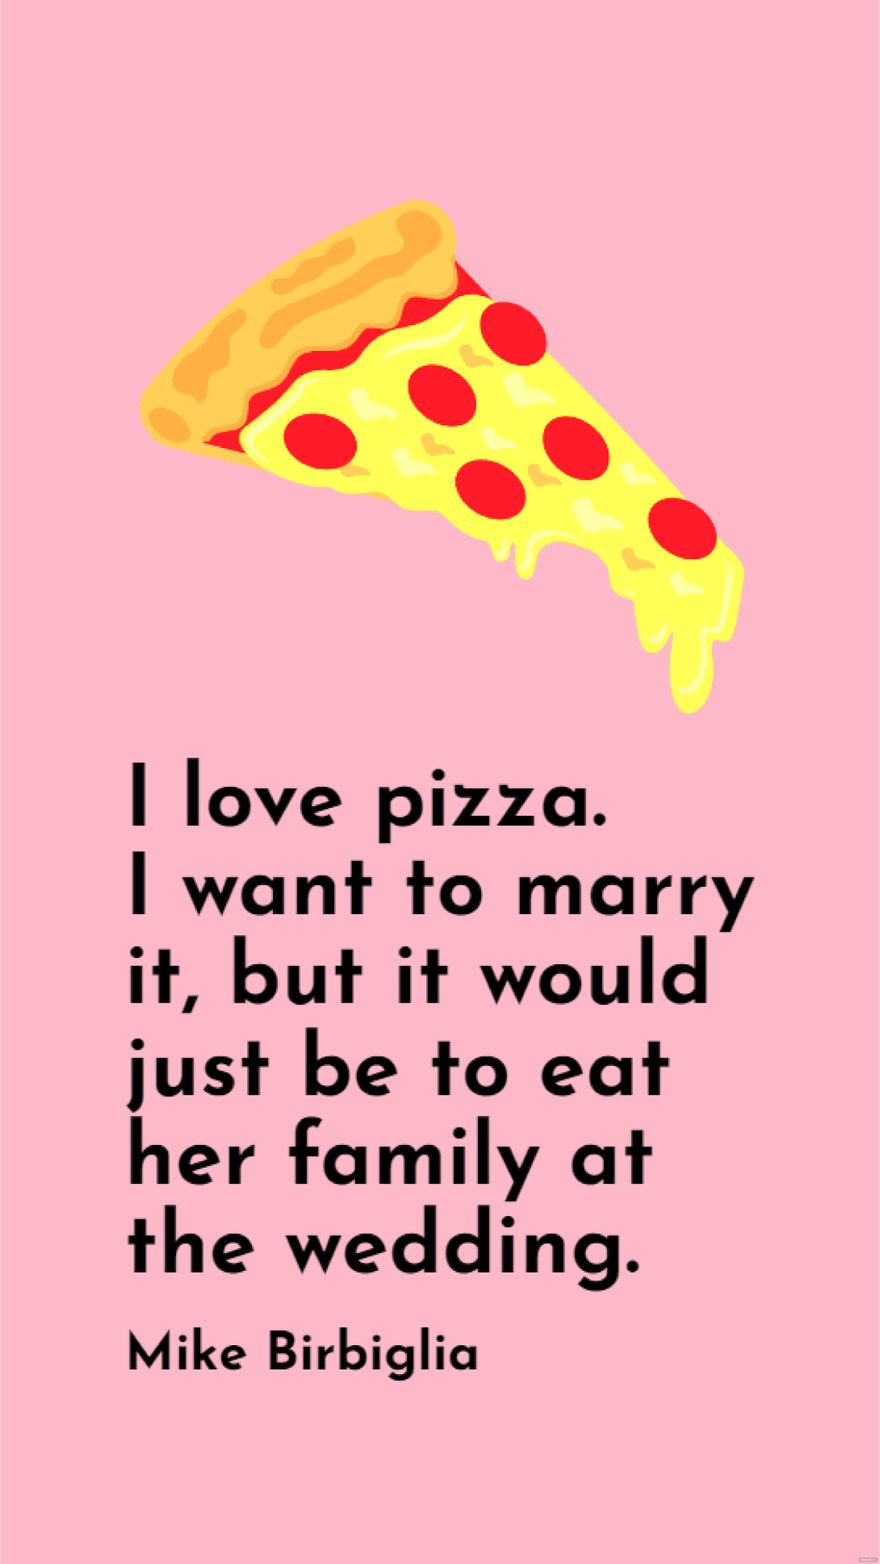 Free Mike Birbiglia - I love pizza. I want to marry it, but it would just be to eat her family at the wedding. in JPG